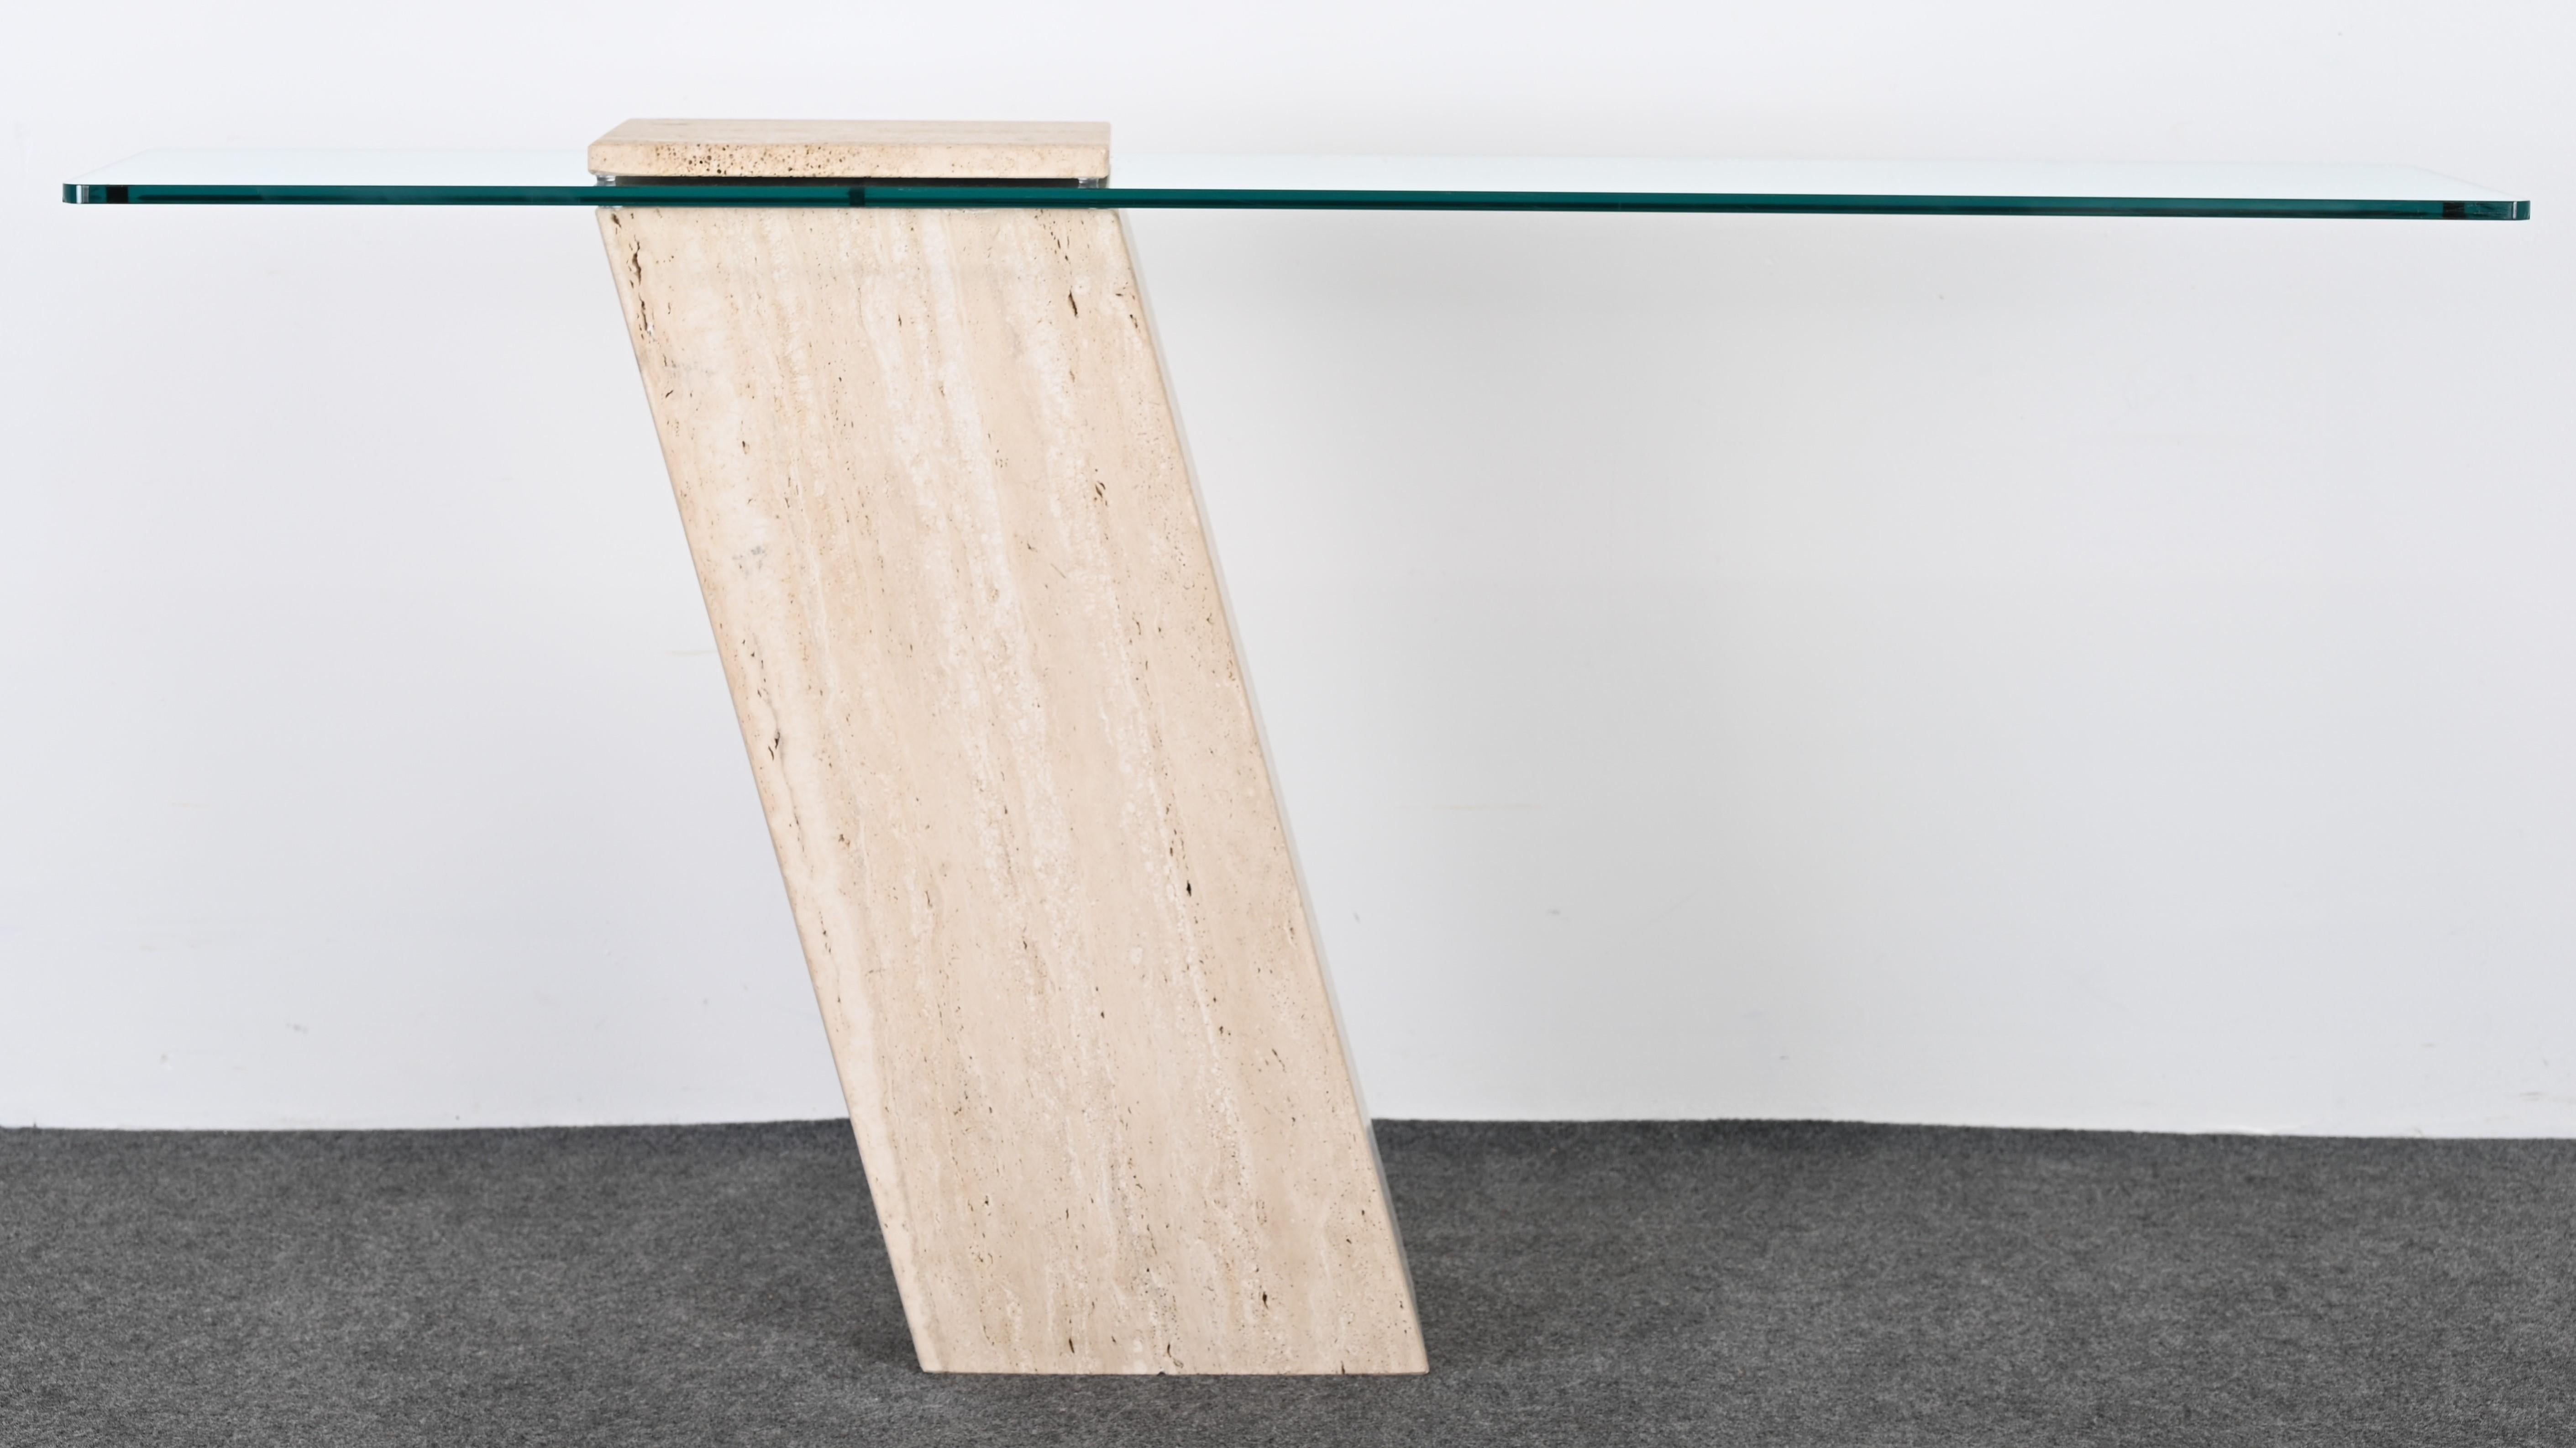 A beautiful minimalist travertine marble and glass console table. This cantilever console table would look great in any Mid-Century Modern, Contemporary or Traditional interior. The marble table is in overall very good condition. There is a slightly